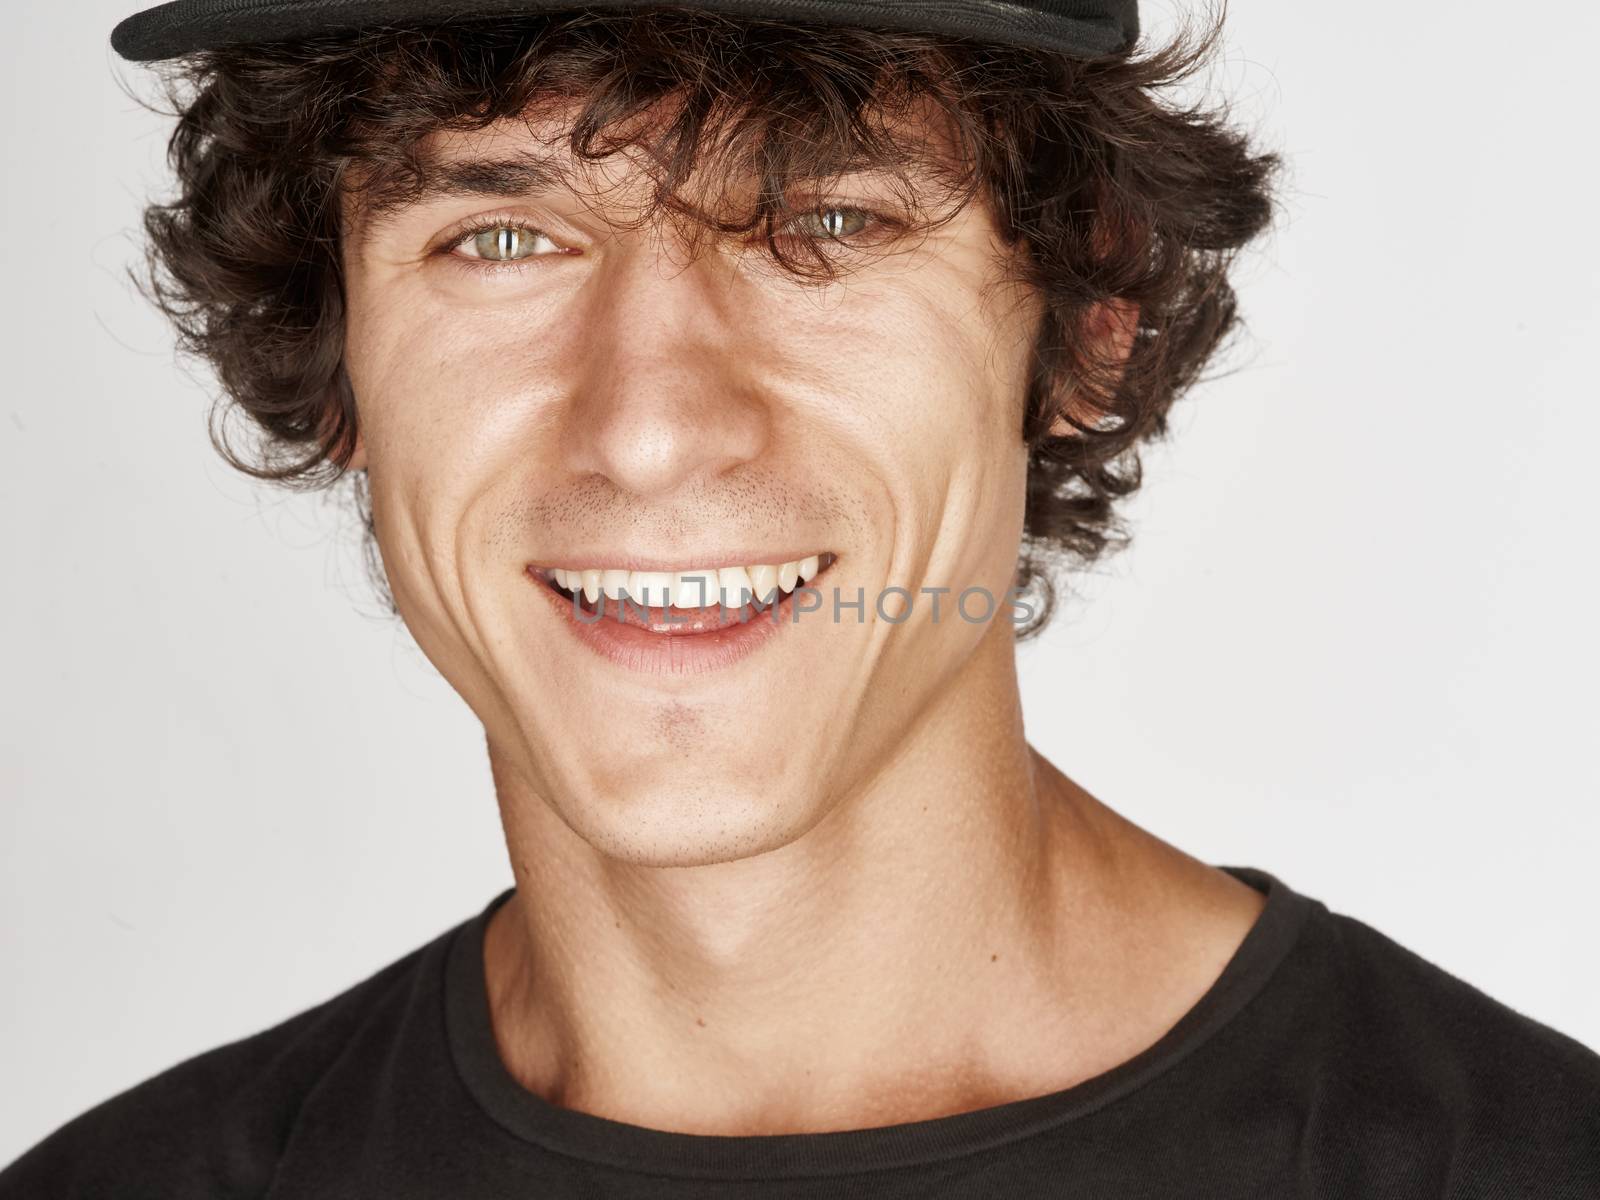 Emotional portrait of a pretty young man with cap